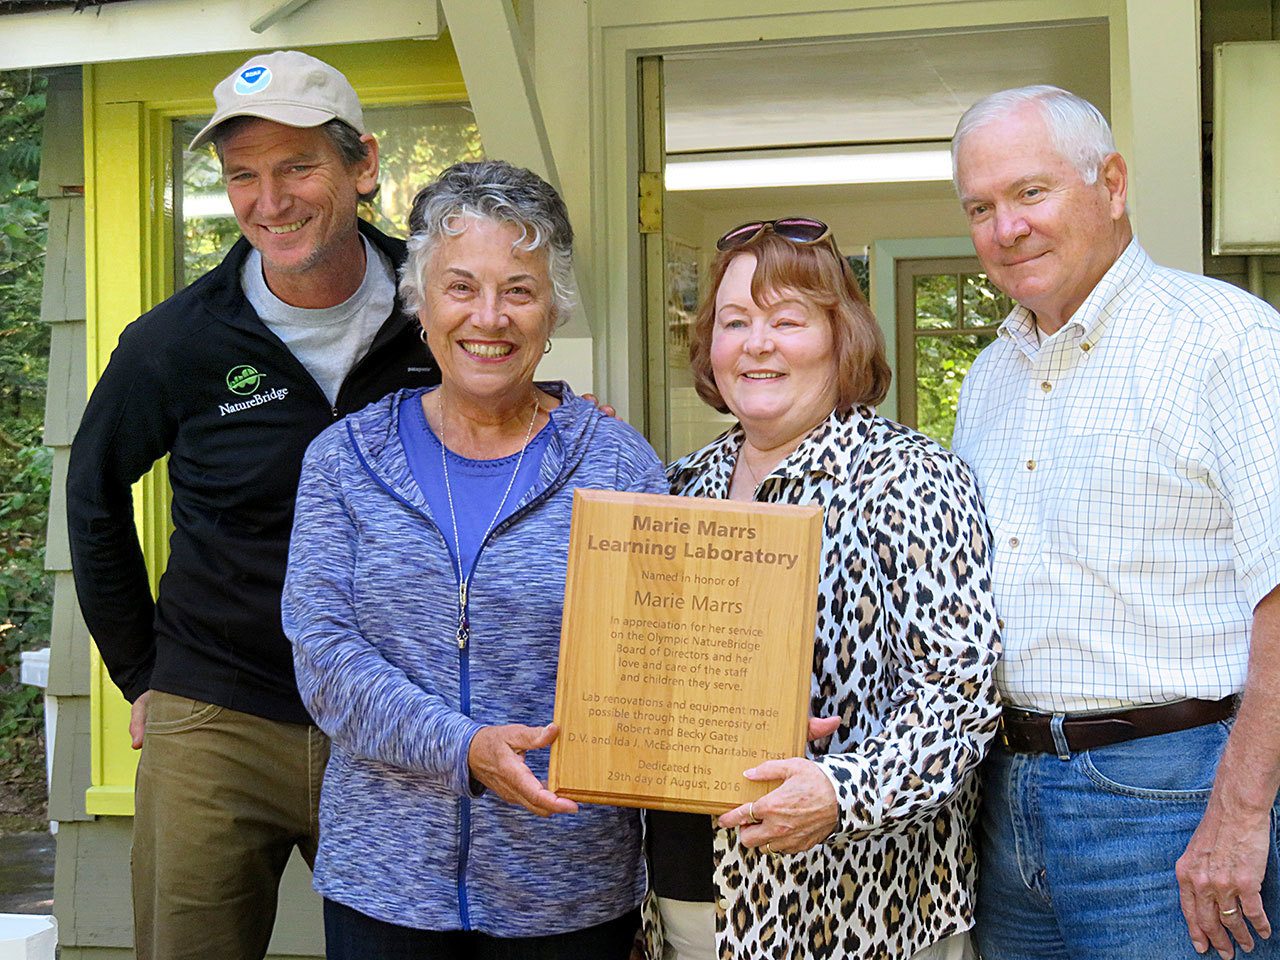 Marie Marrs, second from left, accepts a plaque naming the new science learning laboratory at NatureBridge in Olympic National Park in her honor. The presentation was made by Stephen Streufert, left, and Becky and Robert Gates, right, at the NatureBridge campus at Lake Crescent.